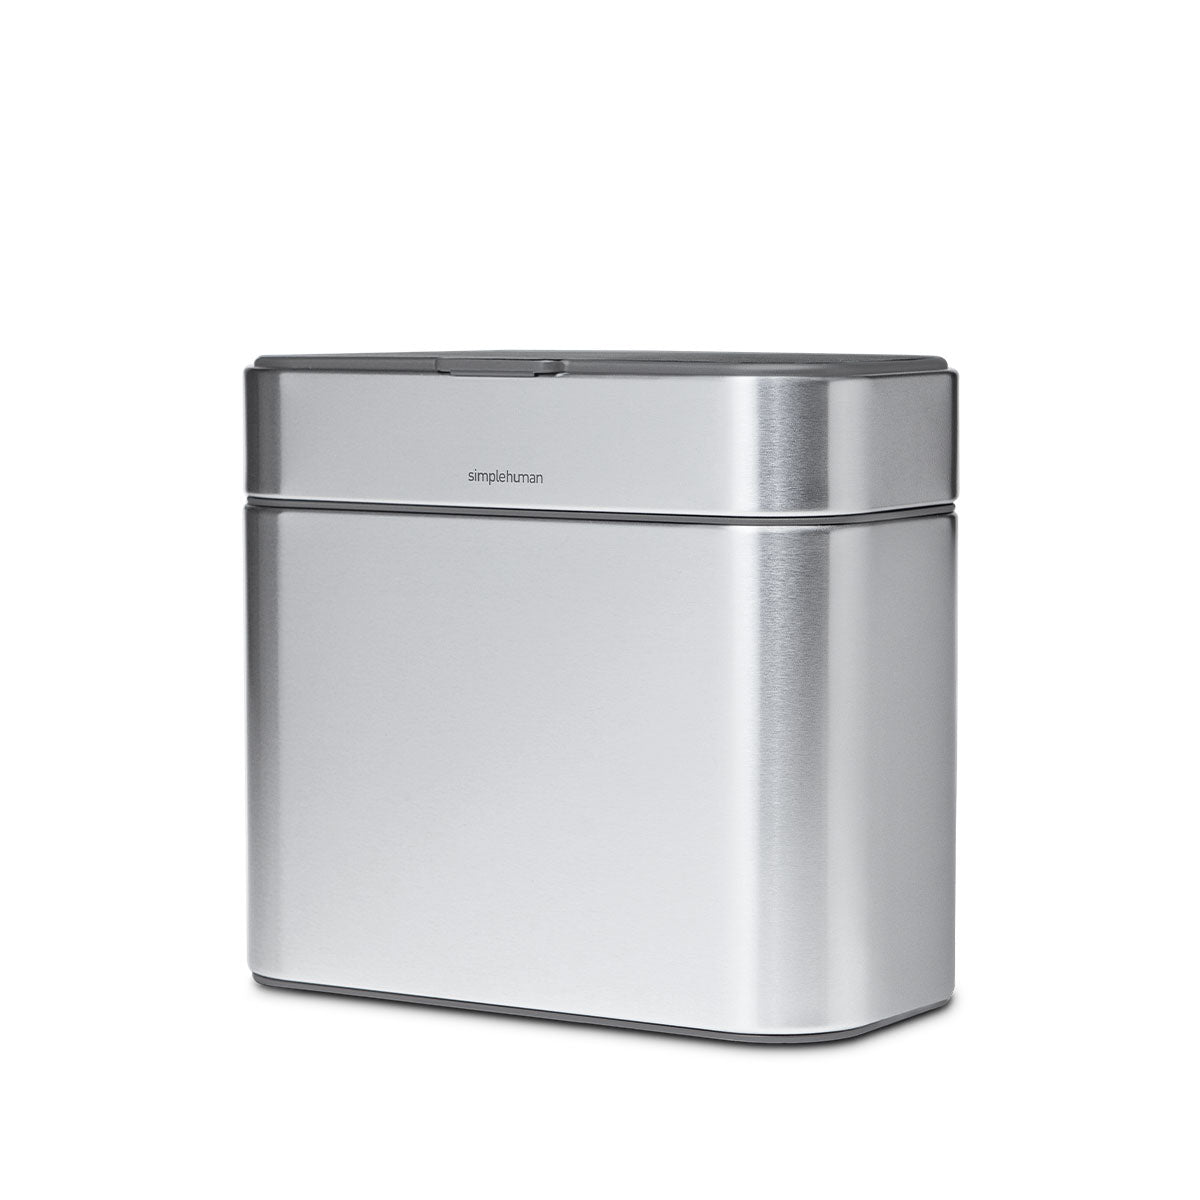 simplehuman - spring into composting ♻️ the new compost caddy attaches to  the side of simplehuman trash cans so waste management is even more  efficient this spring cleaning season. @the.orange.home #simplehuman  #sustainabledesign #